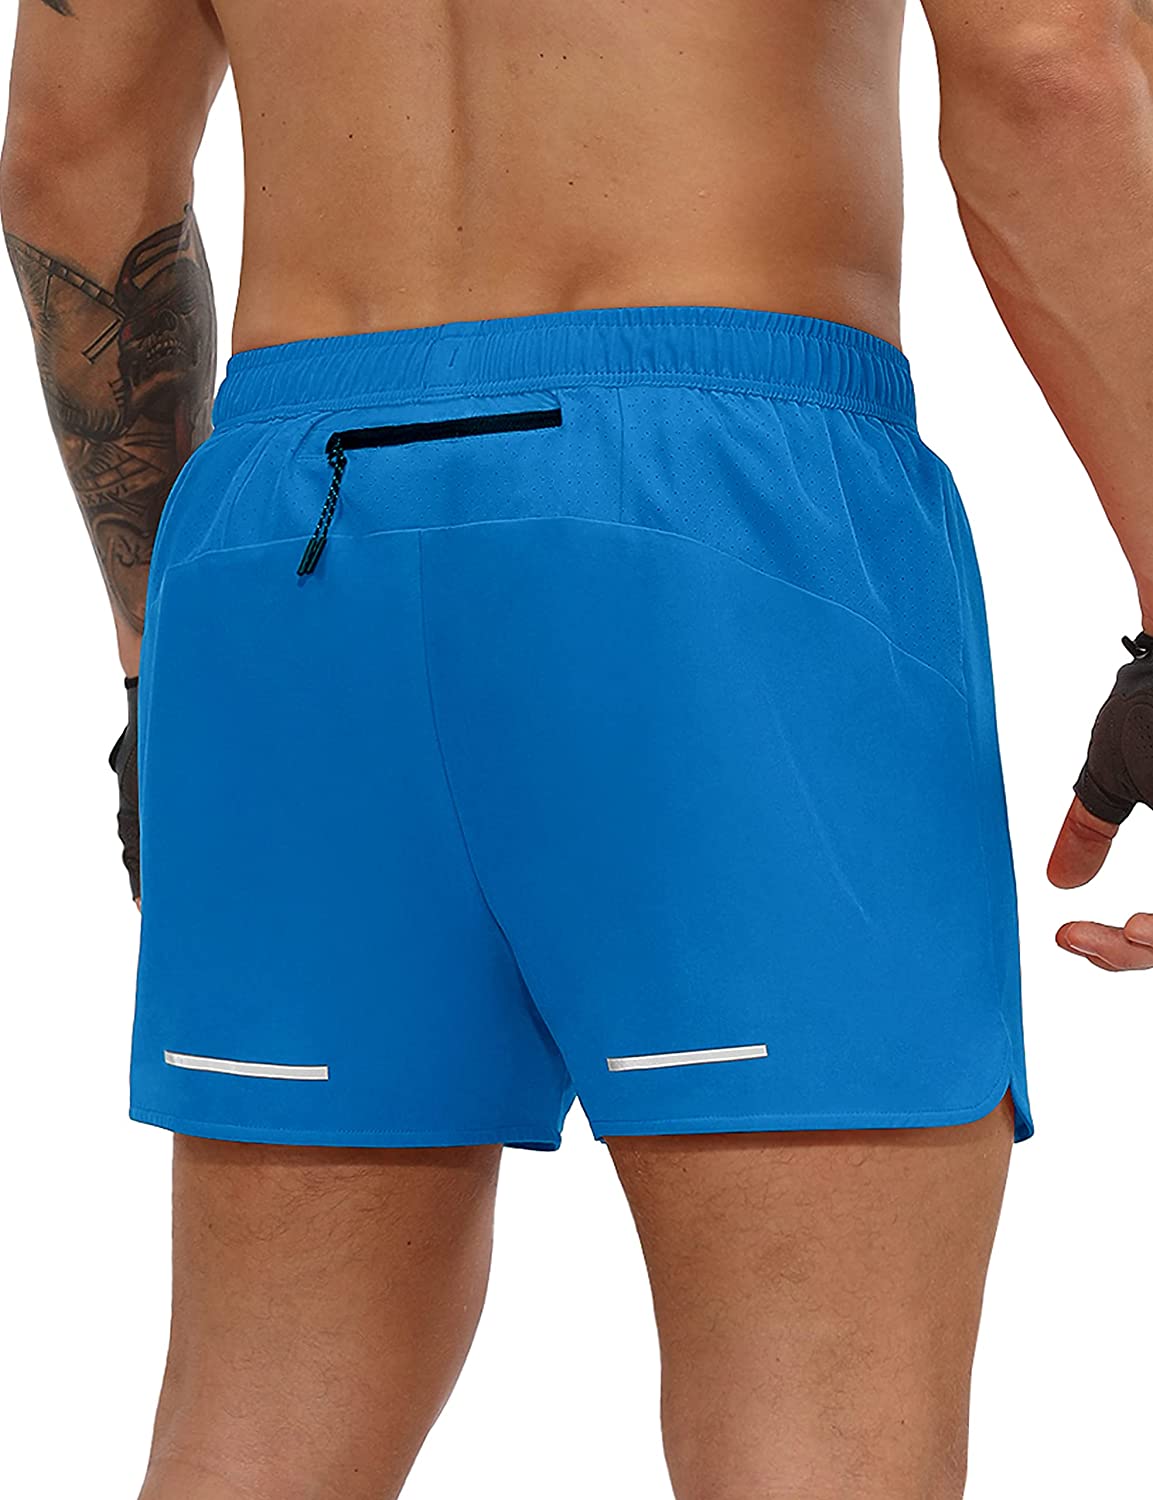 ODODOS Men's 3 Running Shorts with Back Zipper Pocket Quick Dry  Lightweight Ath